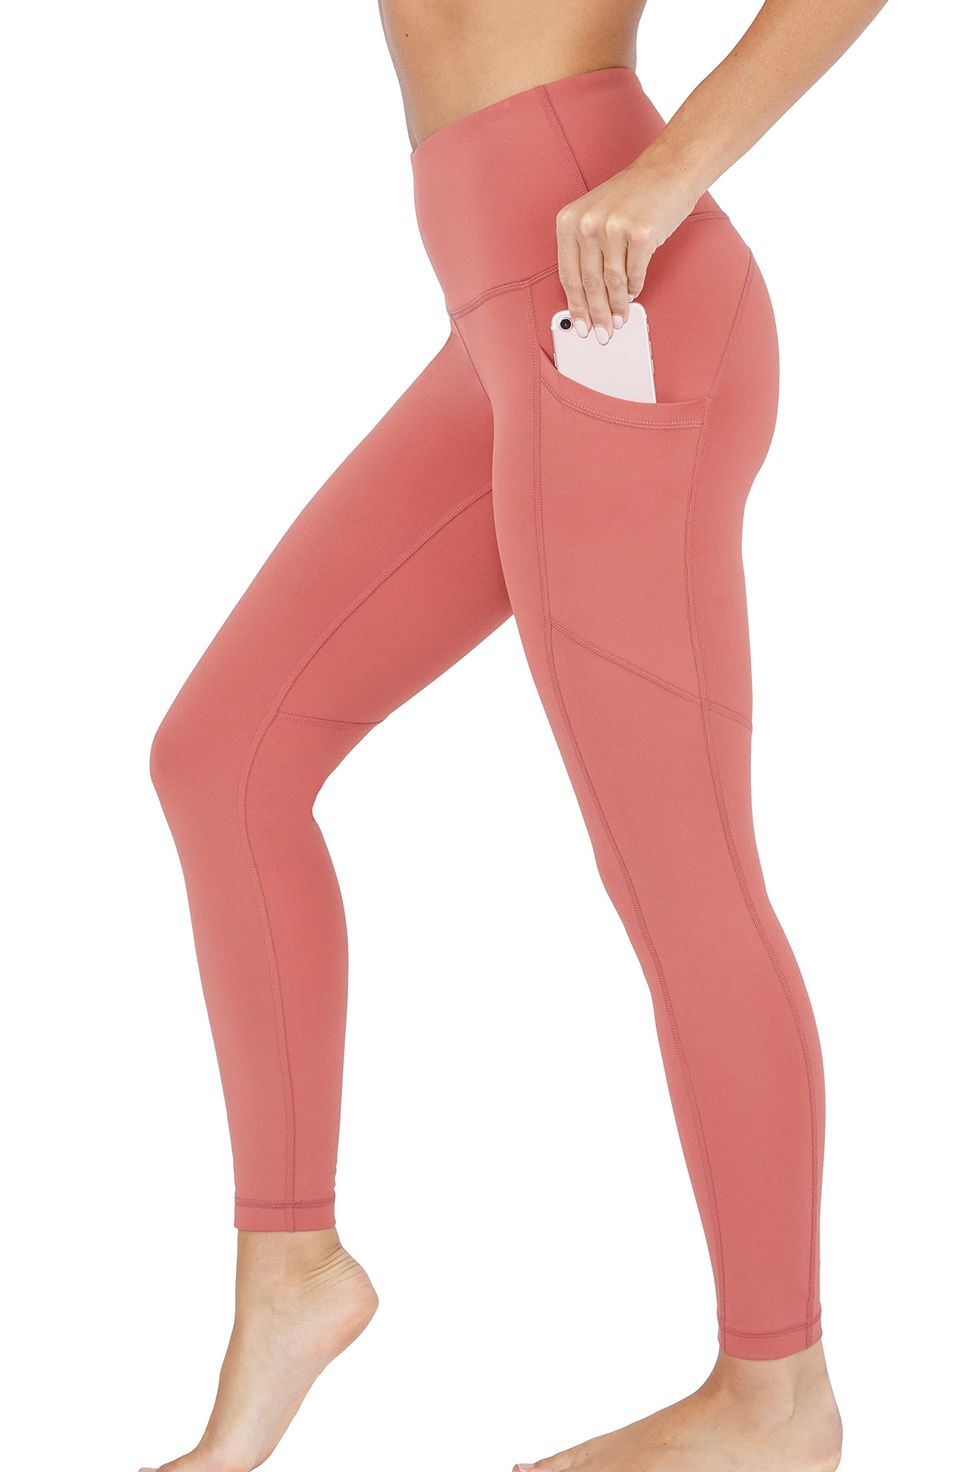 Women's Leggings Thermal Female High Waist Thin Flexiable Solid